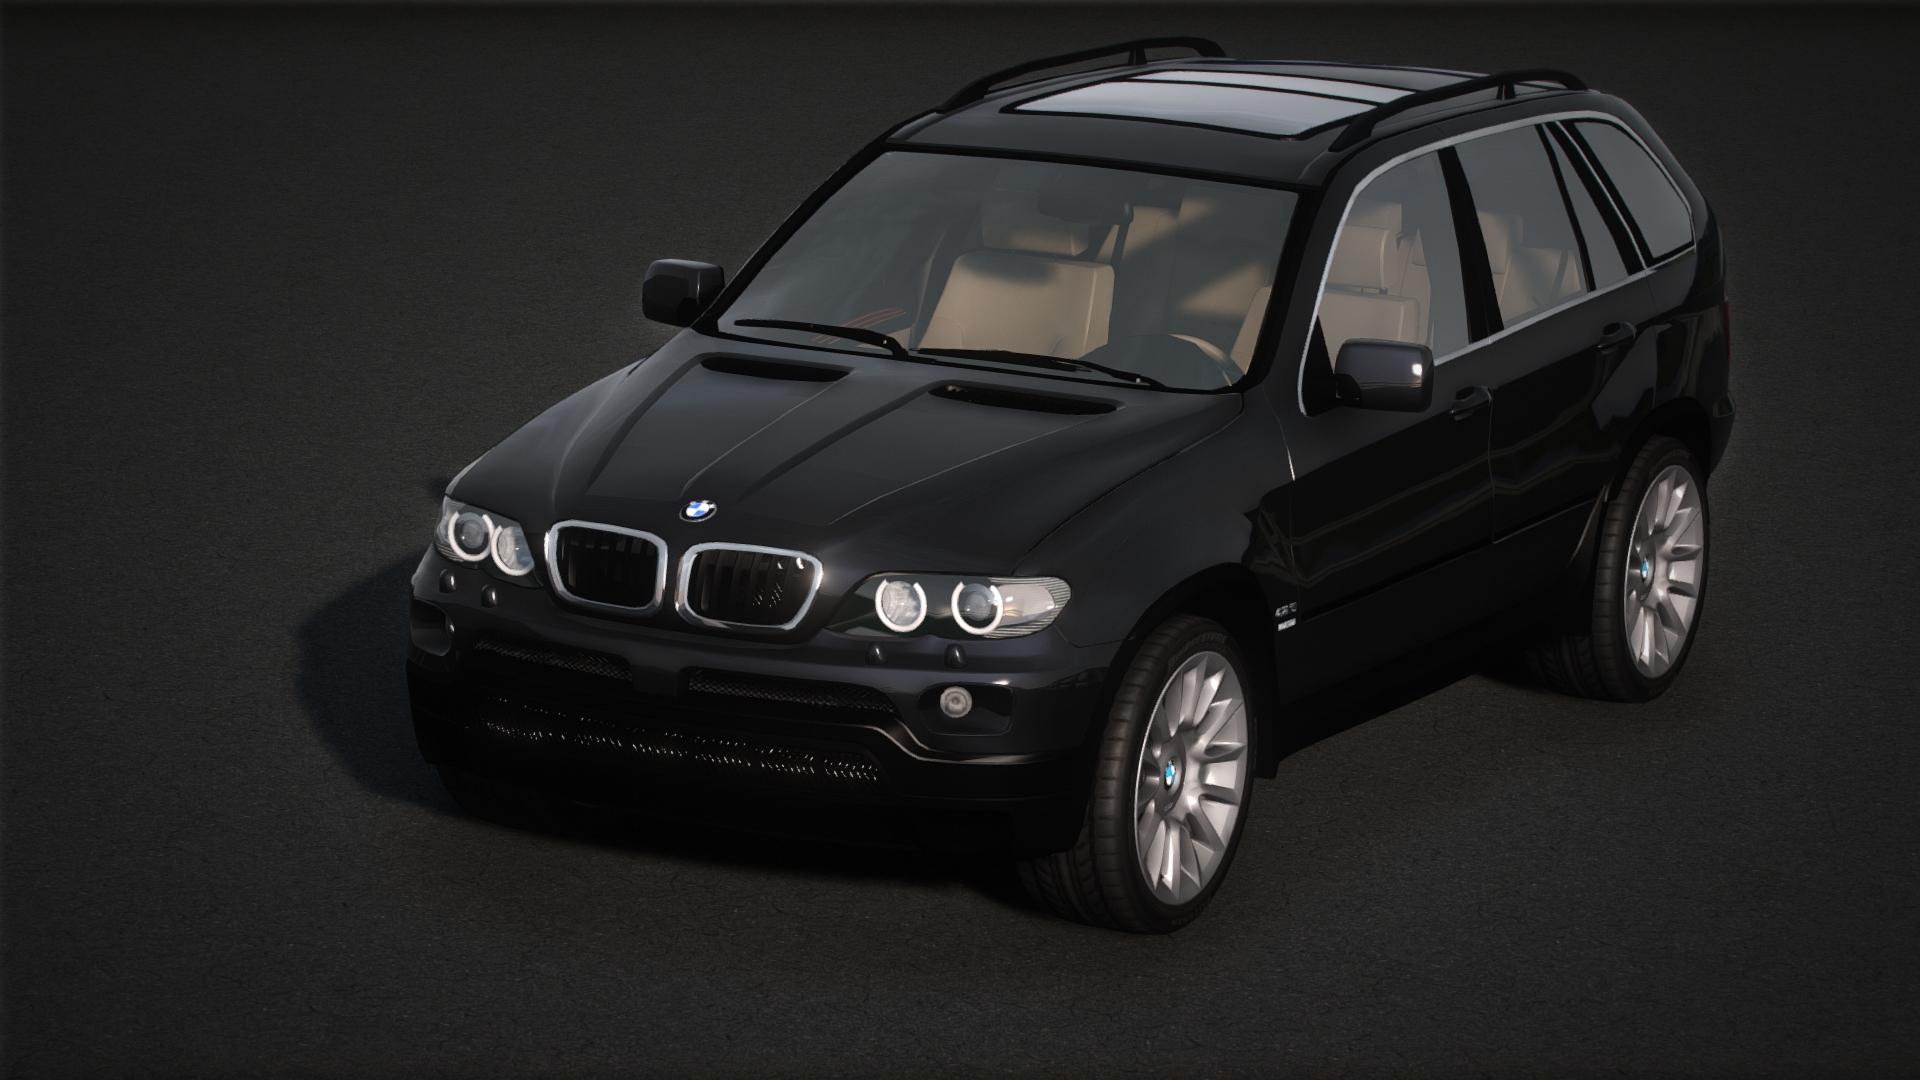 2006 BMW X5 4.8iS Individual (E53) [Add-On / Replace, Tuning